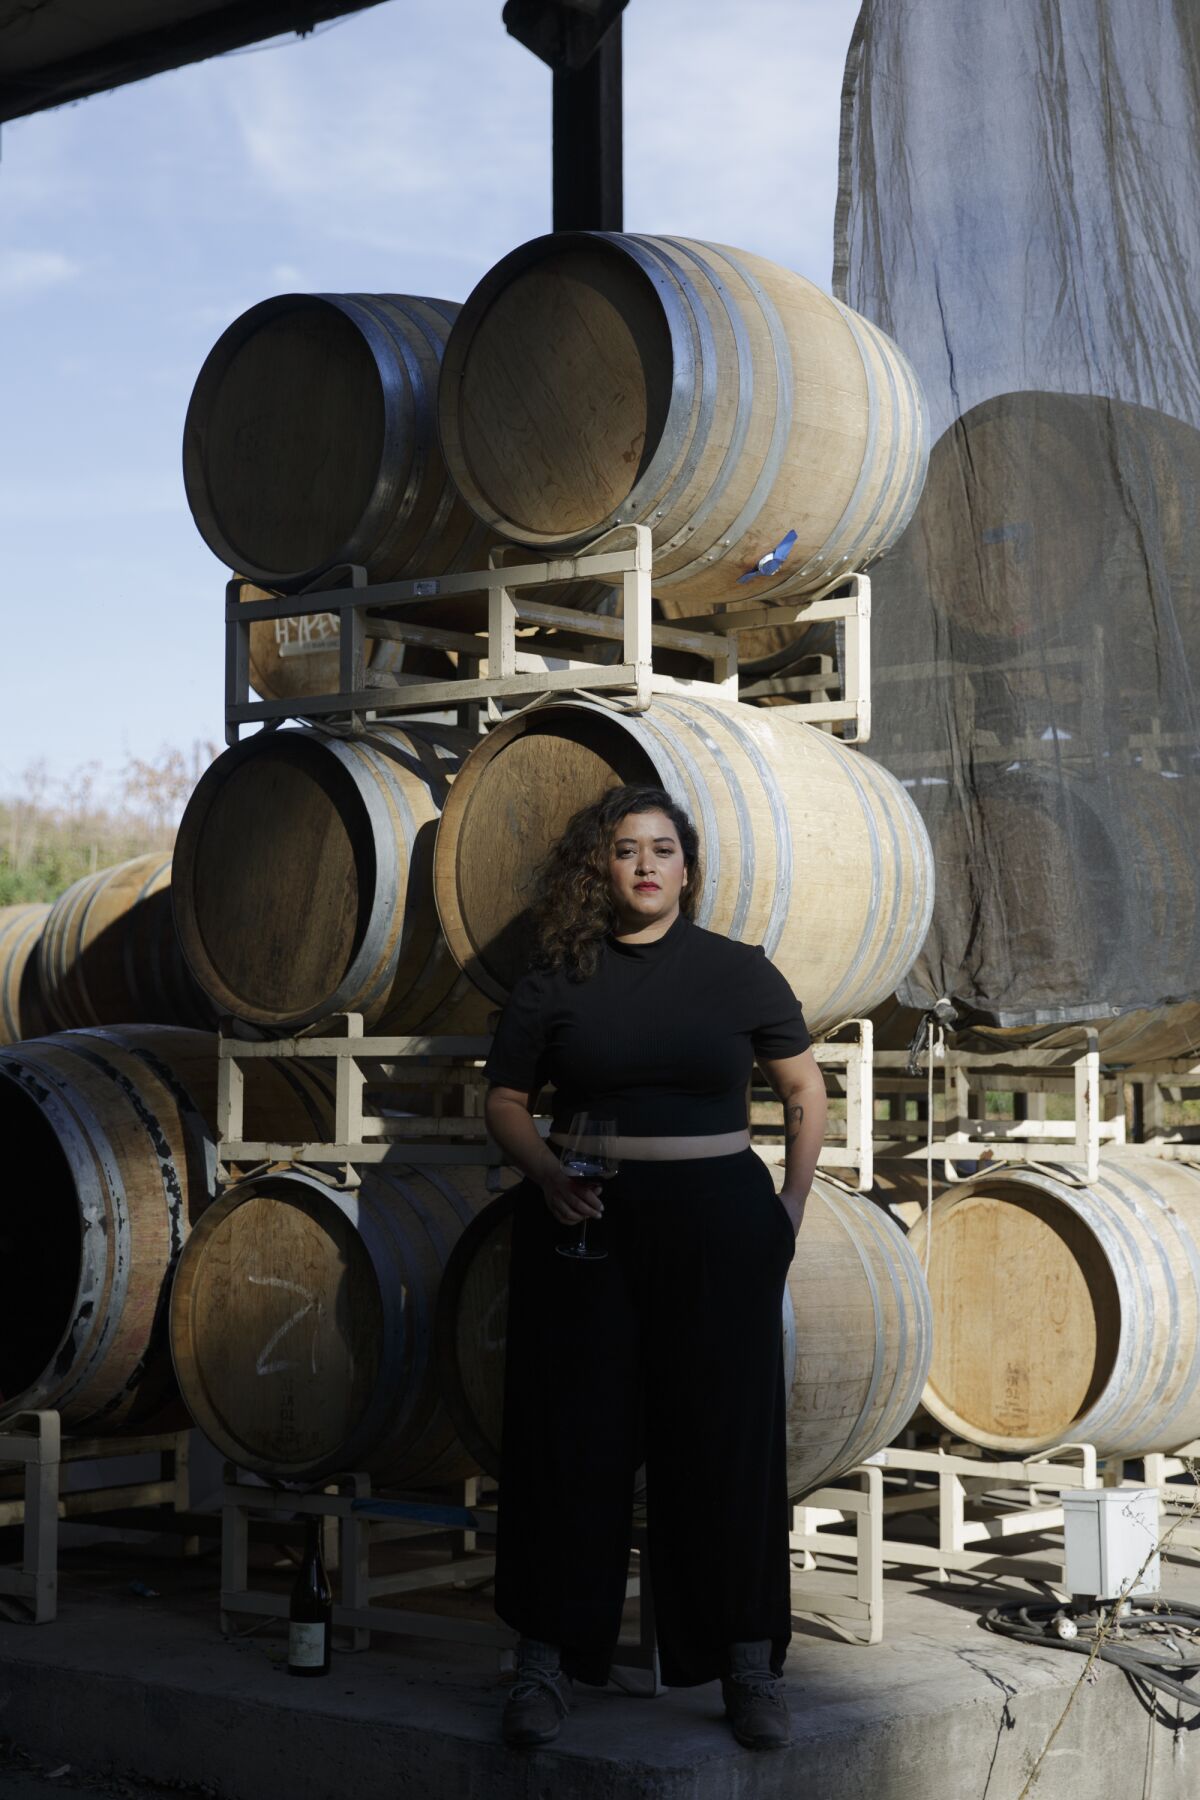 Jirka Jireh stands in front of barrels of wine.